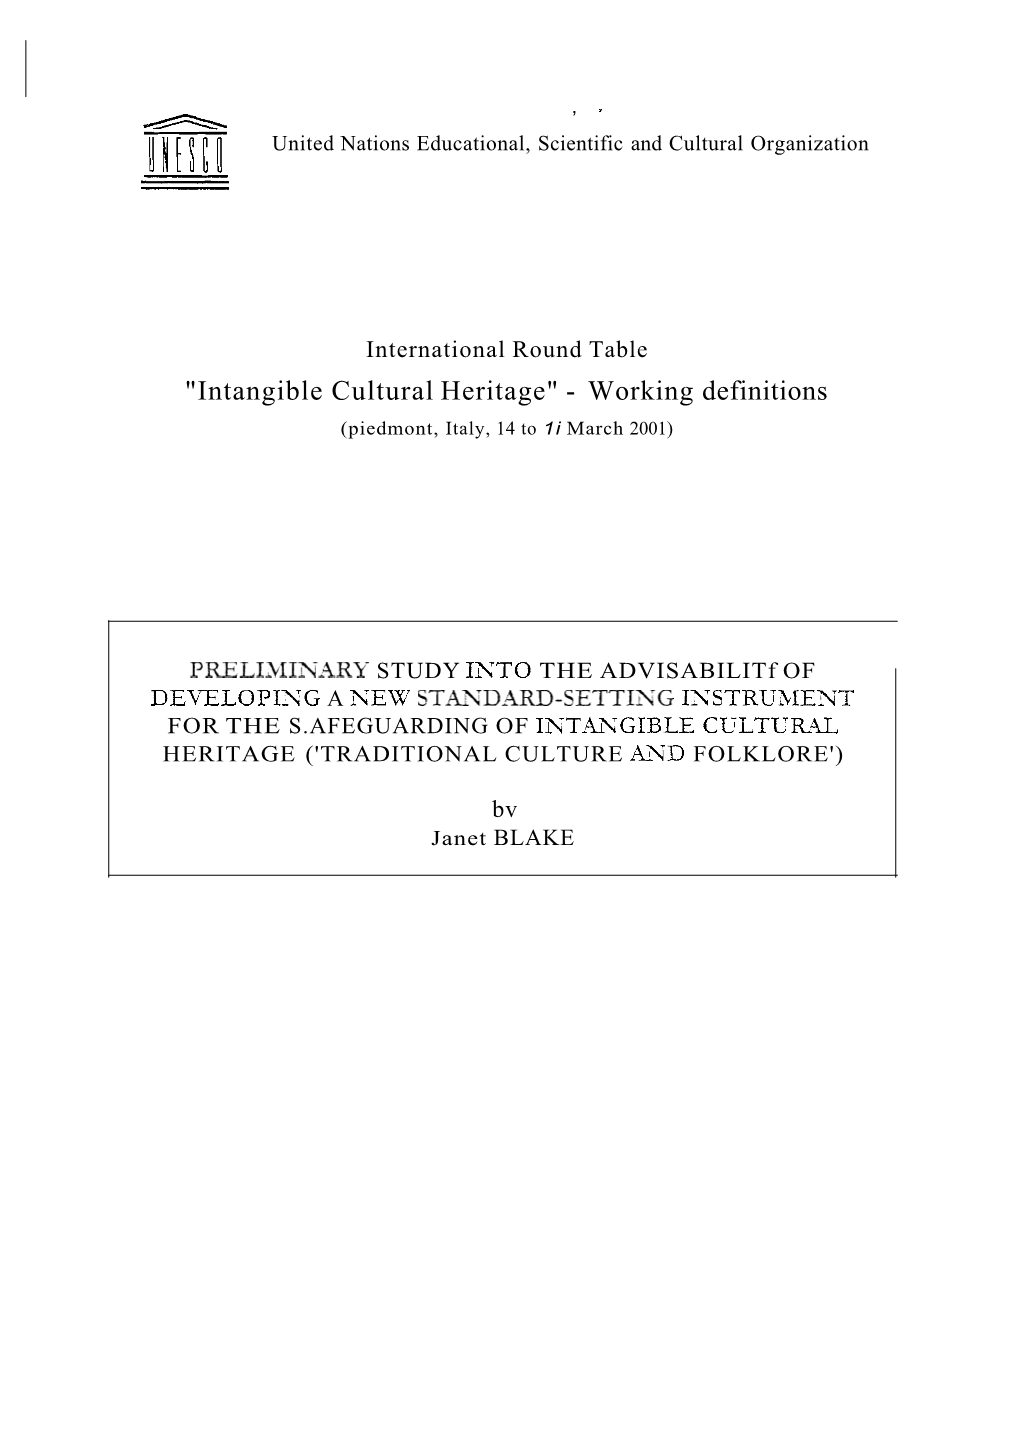 "Intangible Cultural Heritage" - Working Definitions (Piedmont, Italy, 14 to 1I March 2001)